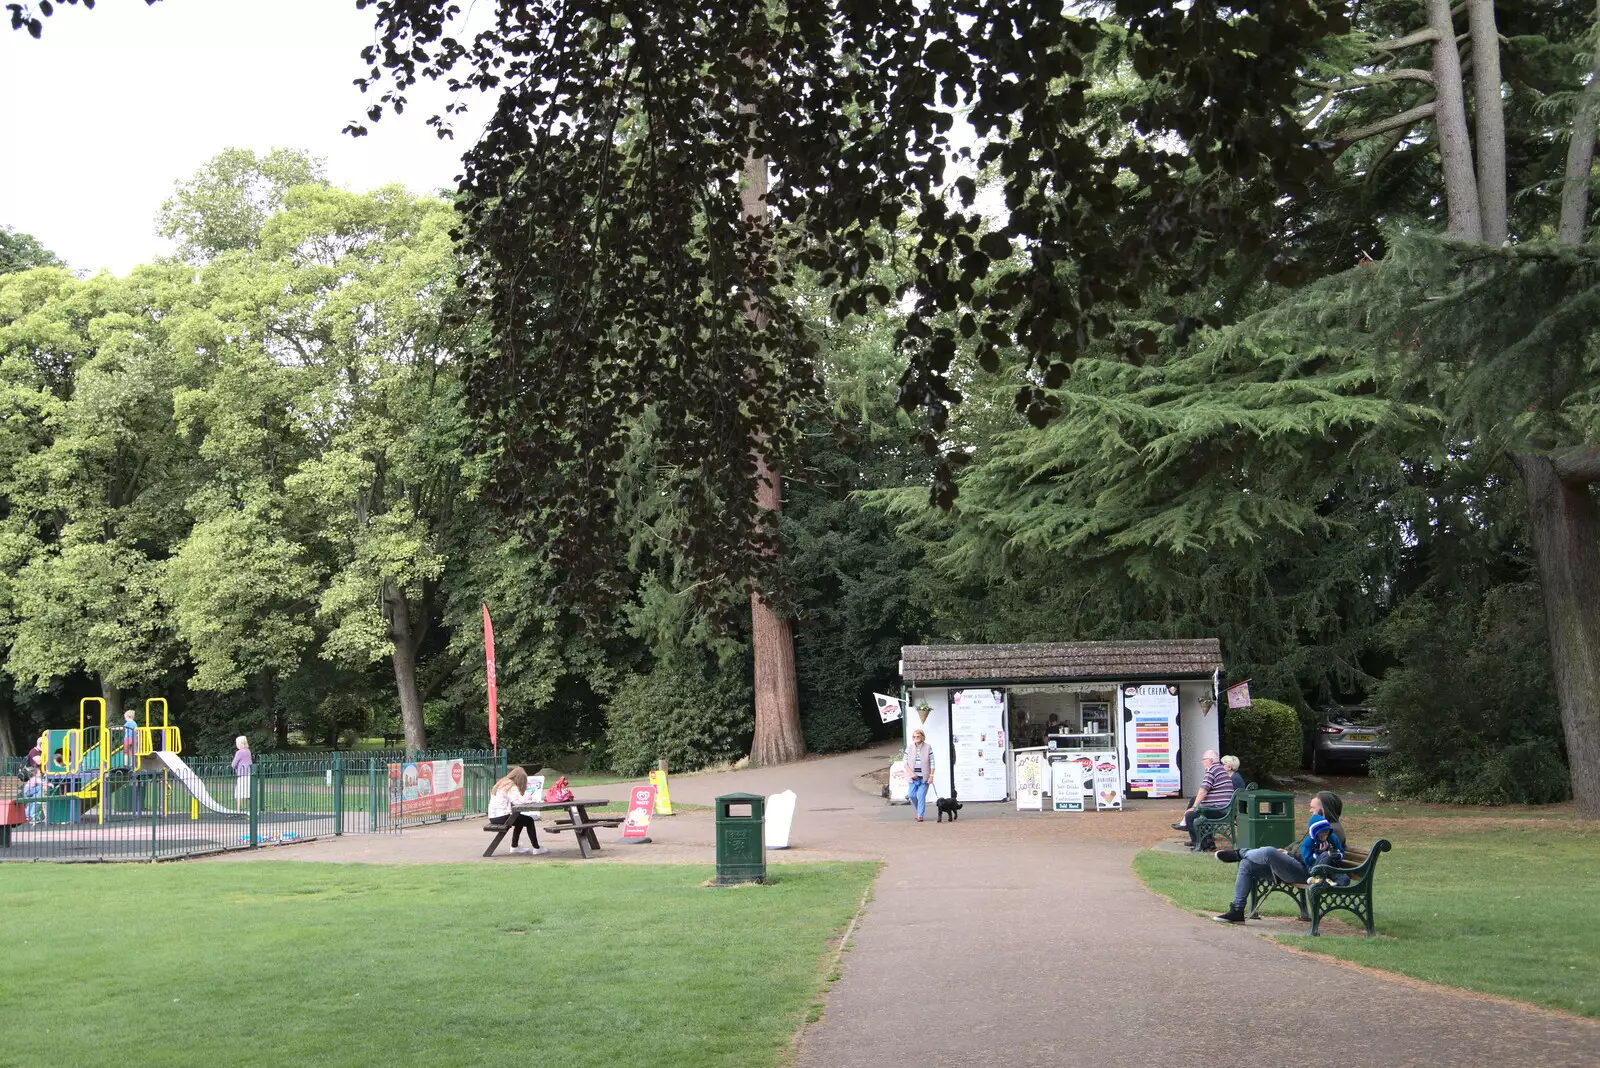 An ice-cream shop in the park, from Pork Pies and Dockside Dereliction, Melton Mowbray and Liverpool - 7th August 2021